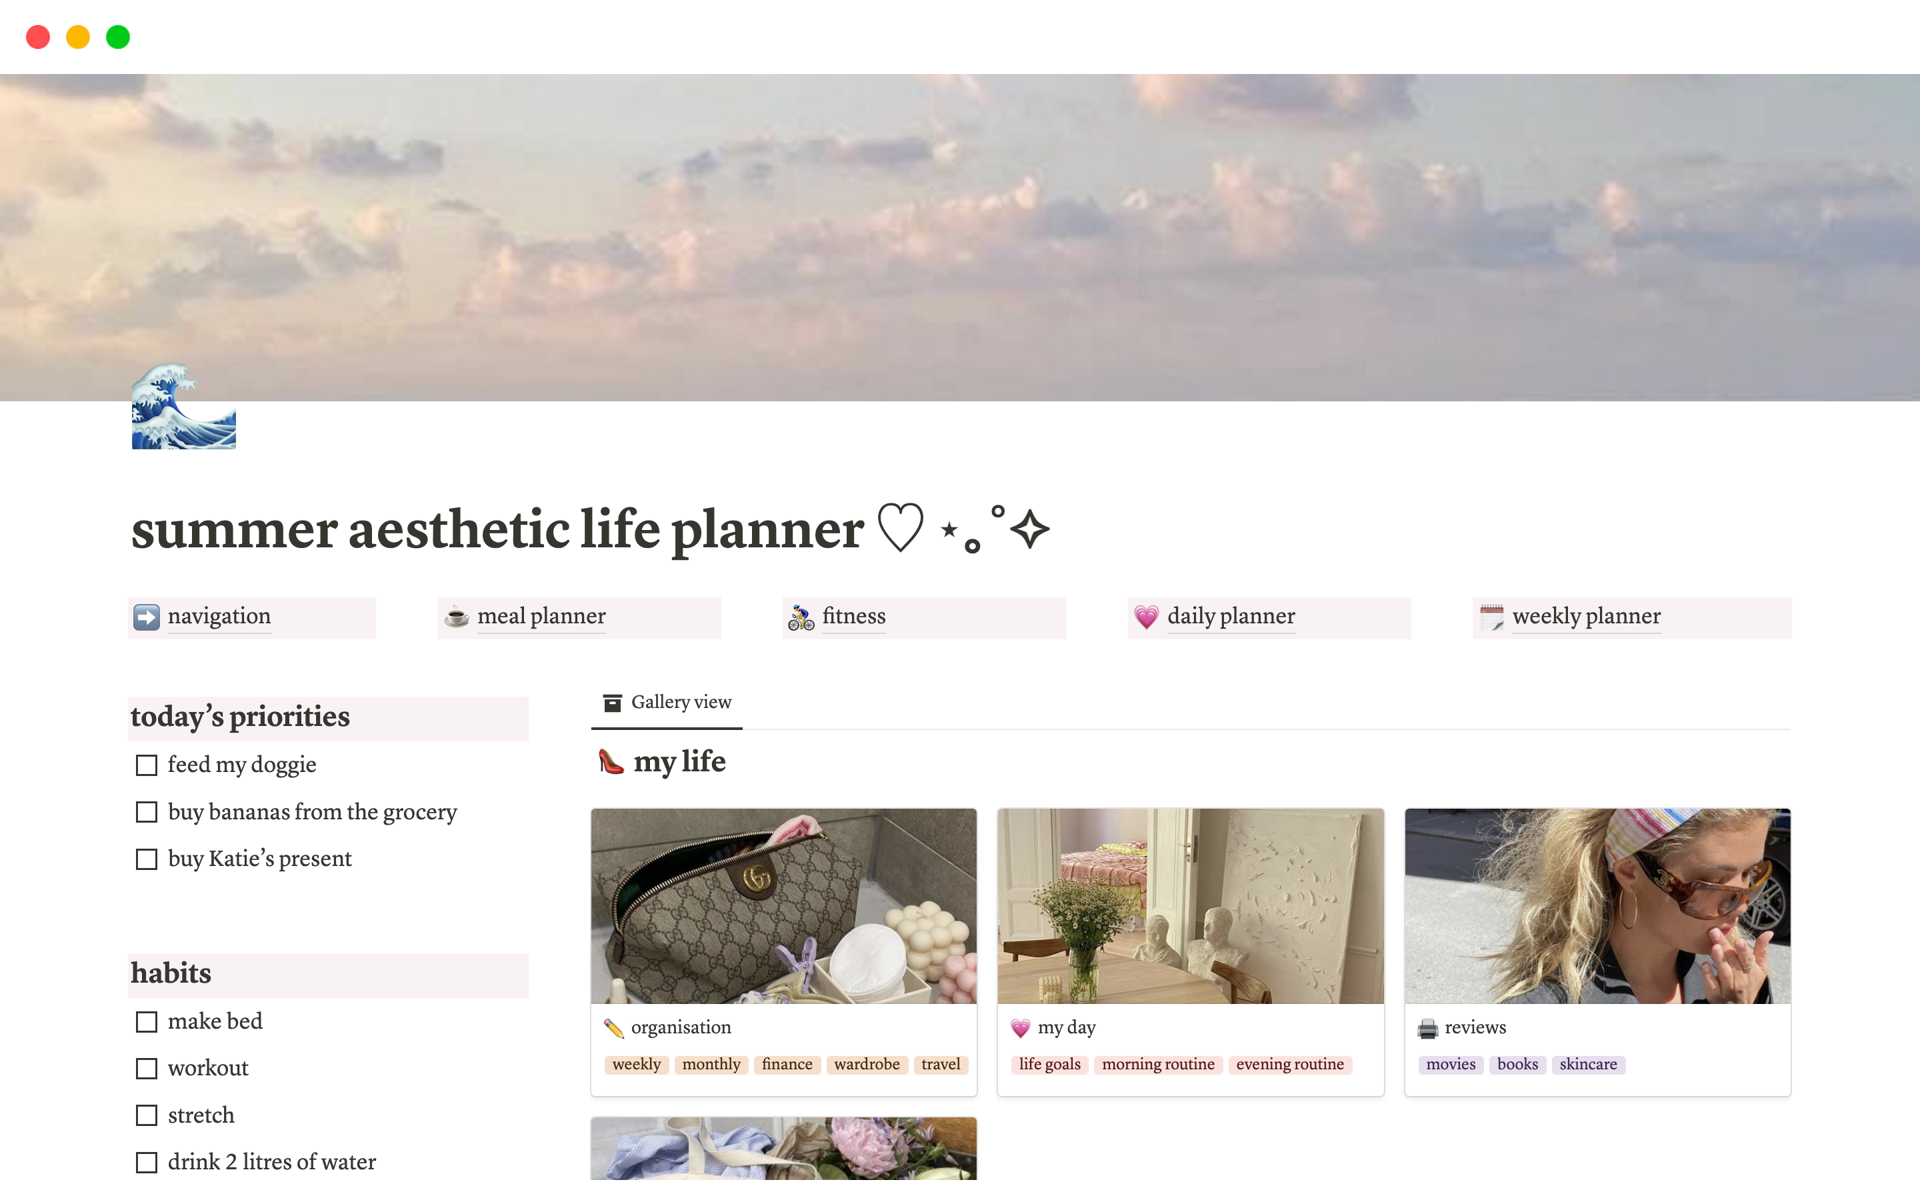 Get ready to be organised with this aesthetic summer that girl themed notion life planner template that has been carefully developed to coordinate your chores, schedule and much more.